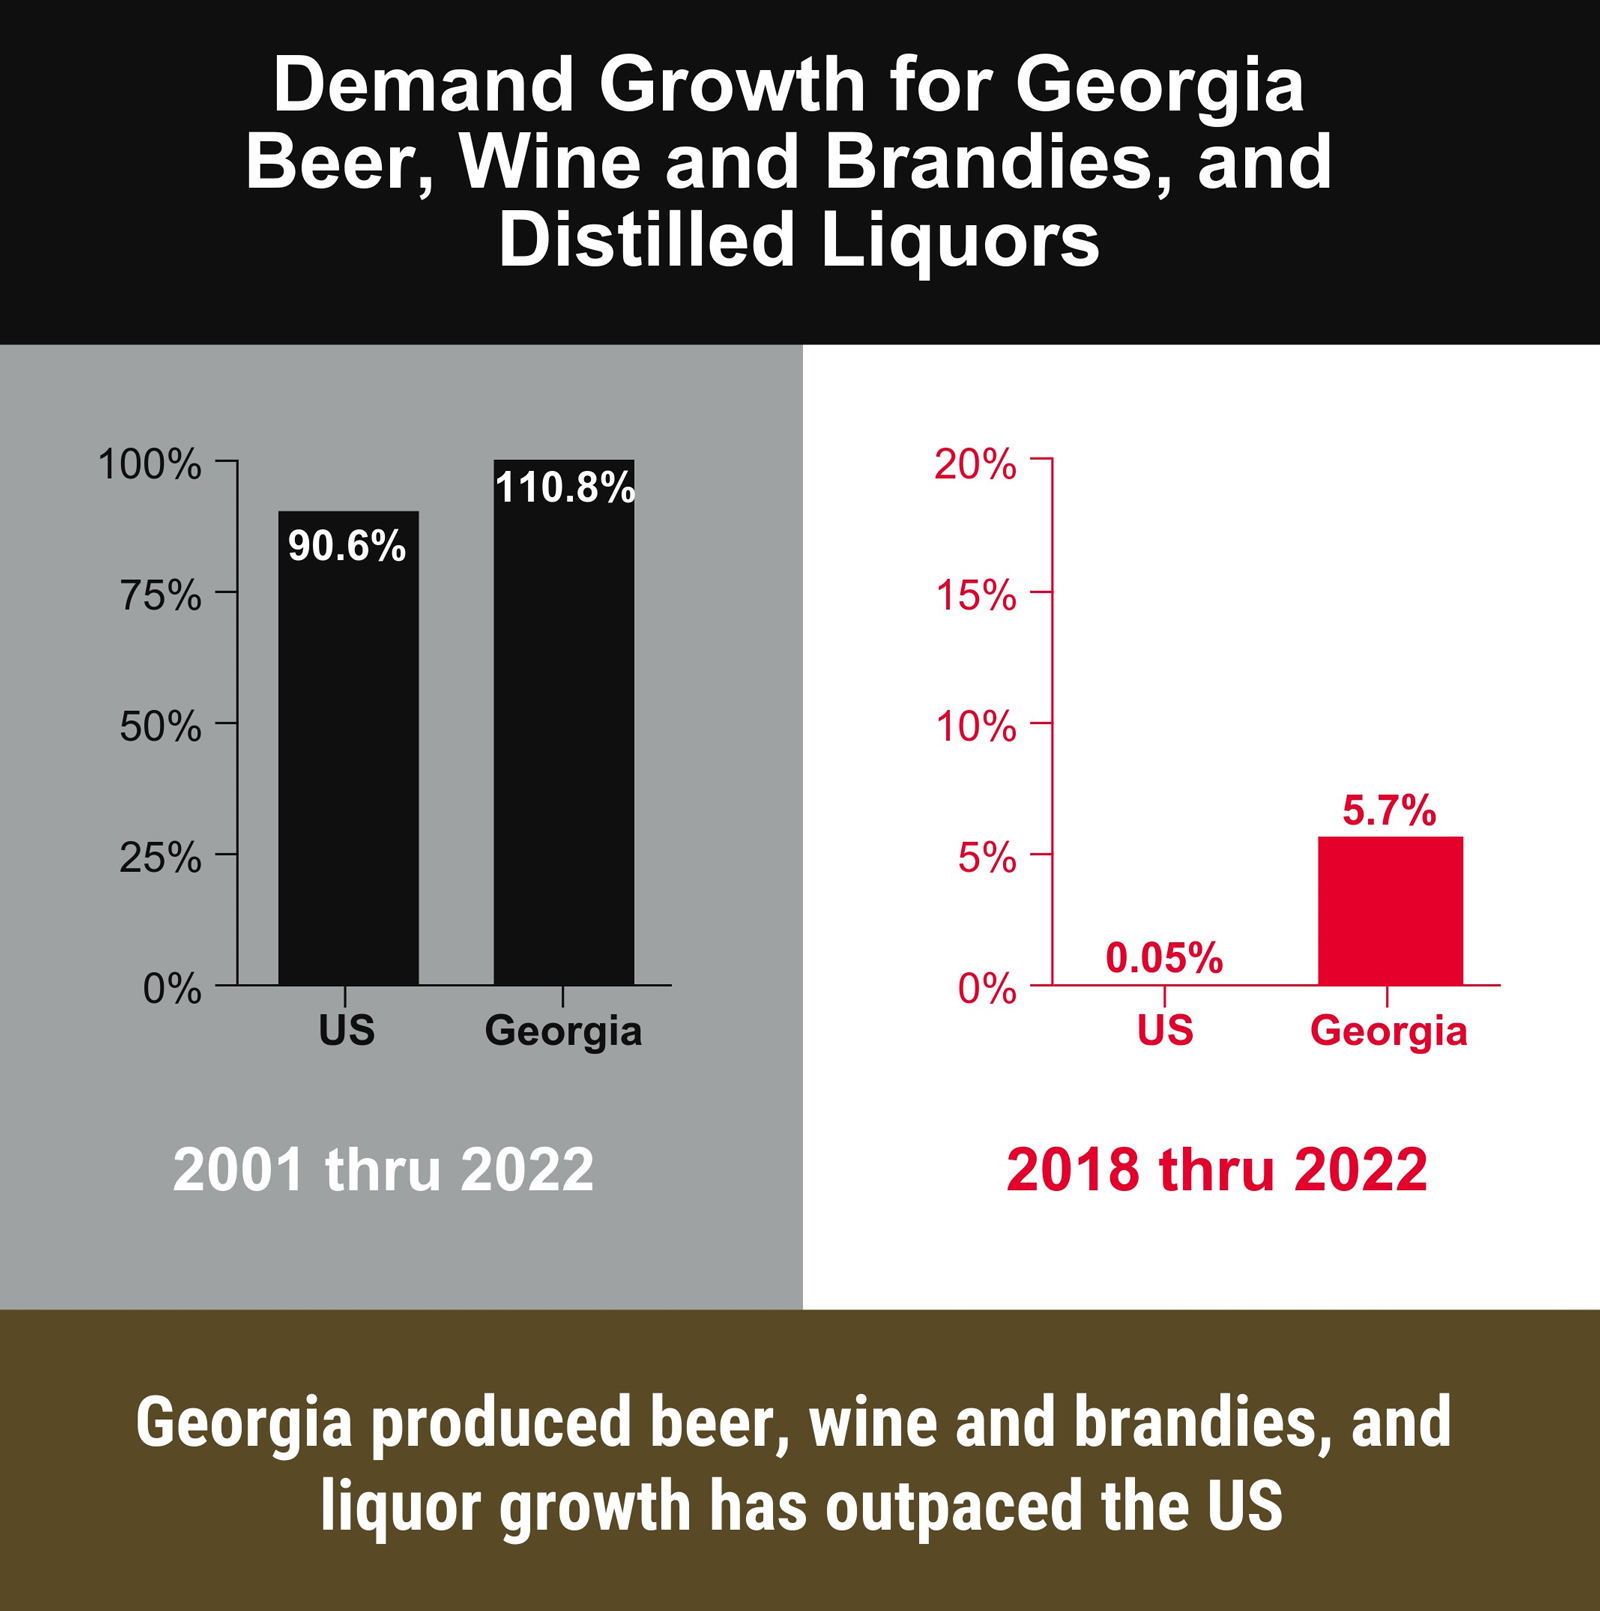 Growth in demand for Georgia-made alcoholic beverages has increased greater than the demand for the U.S. as a whole, with 110.8% growth between 2001 and 2022, and 5.7% growth between 2018 and 2022.